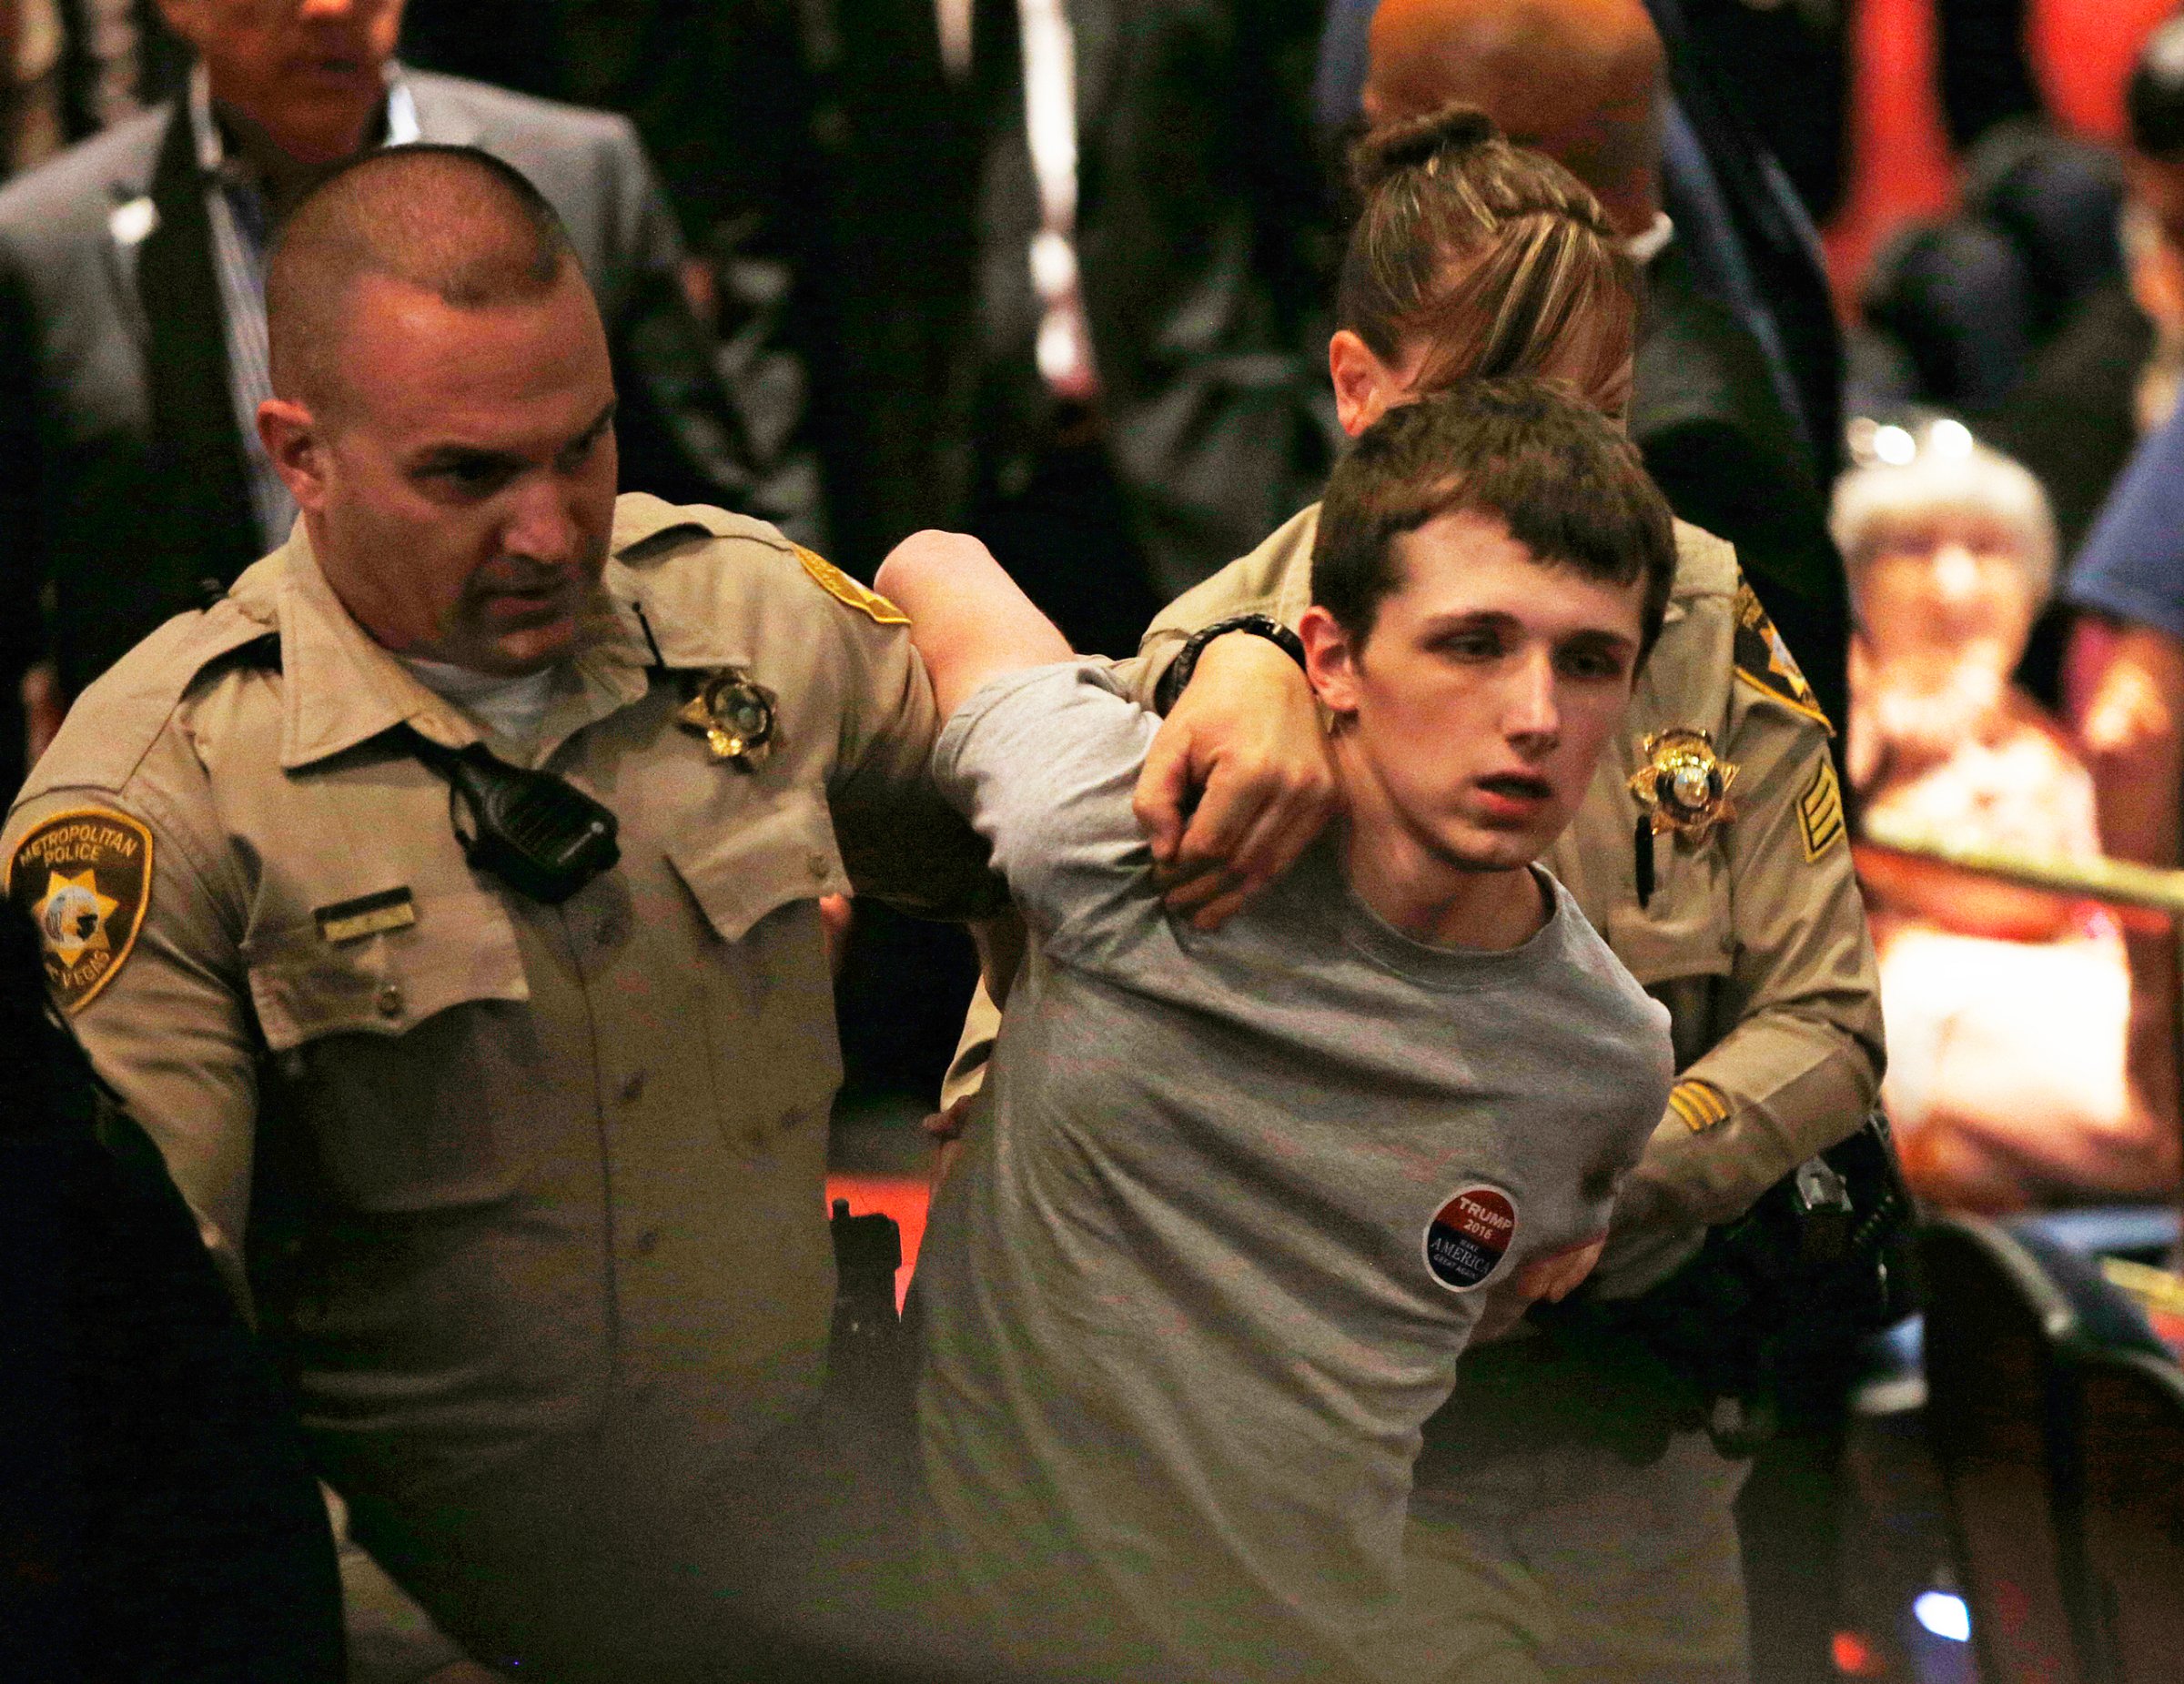 FILE - In this June 18, 2016, photo, police remove Michael Sandford as Republican presidential candidate Donald Trump speaks at the Treasure Island hotel and casino in Las Vegas. The mother of Standford who is accused of attempting to shoot Donald Trump told British television he will plead guilty to lesser charges in a U.S. court. Lynne Sandford, the mother of Michael Sandford, told the station her son has signed a plea agreement in advance of a Nevada court appearance Tuesday, Sept. 13. (AP Photo/John Locher, File)